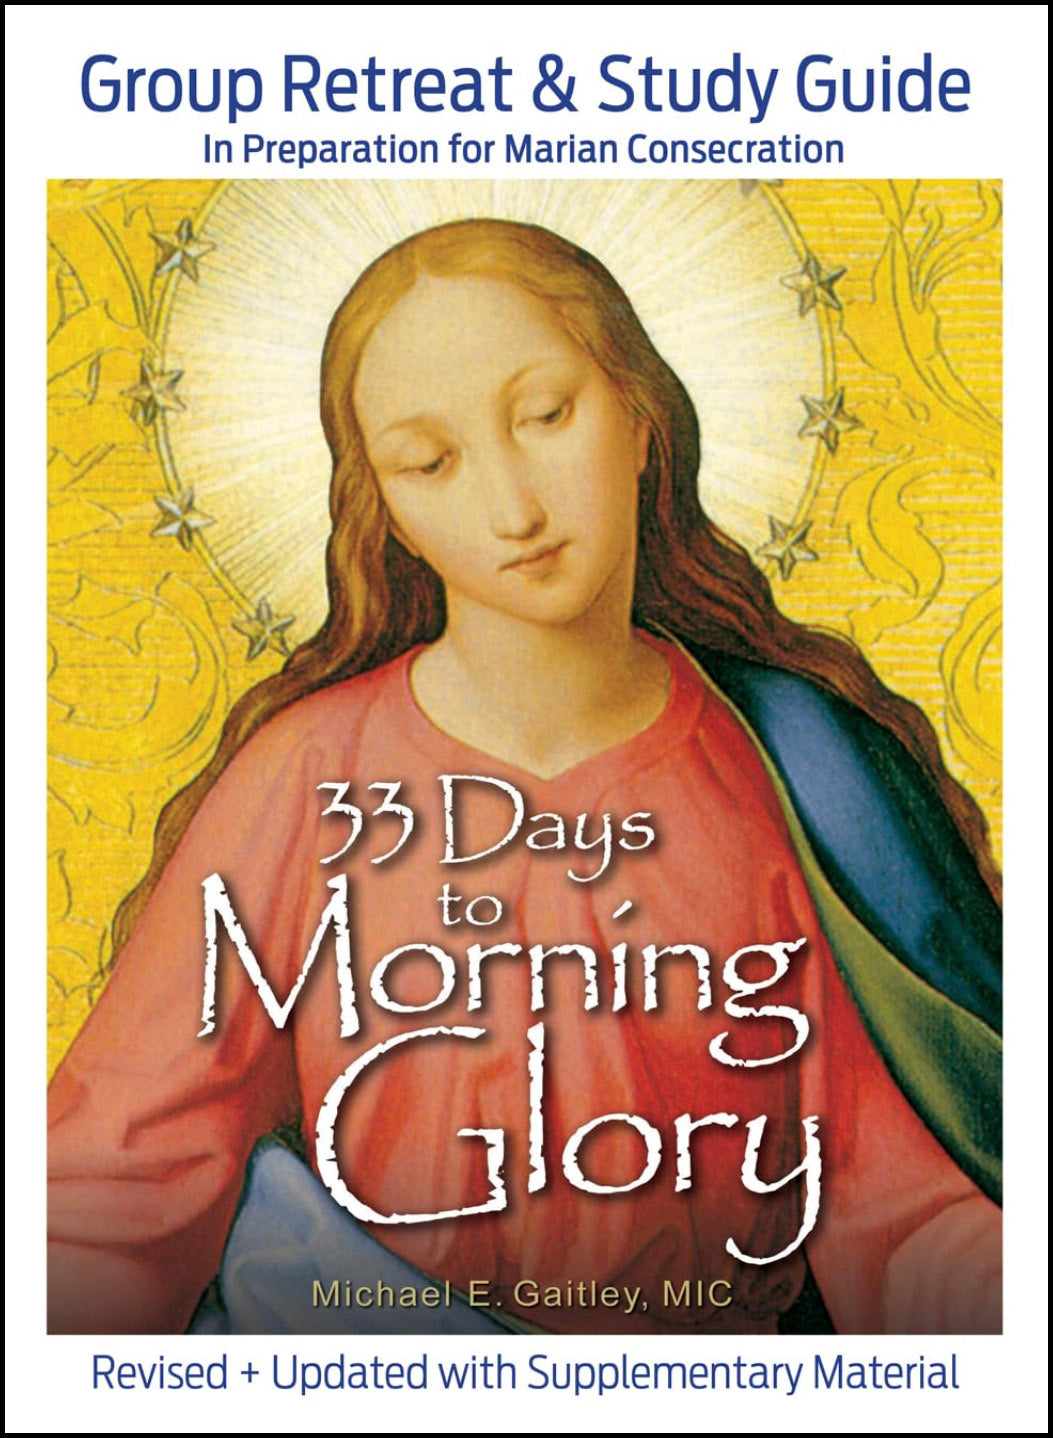 33 Days to Morning Glory: Group Retreat & Study Guide